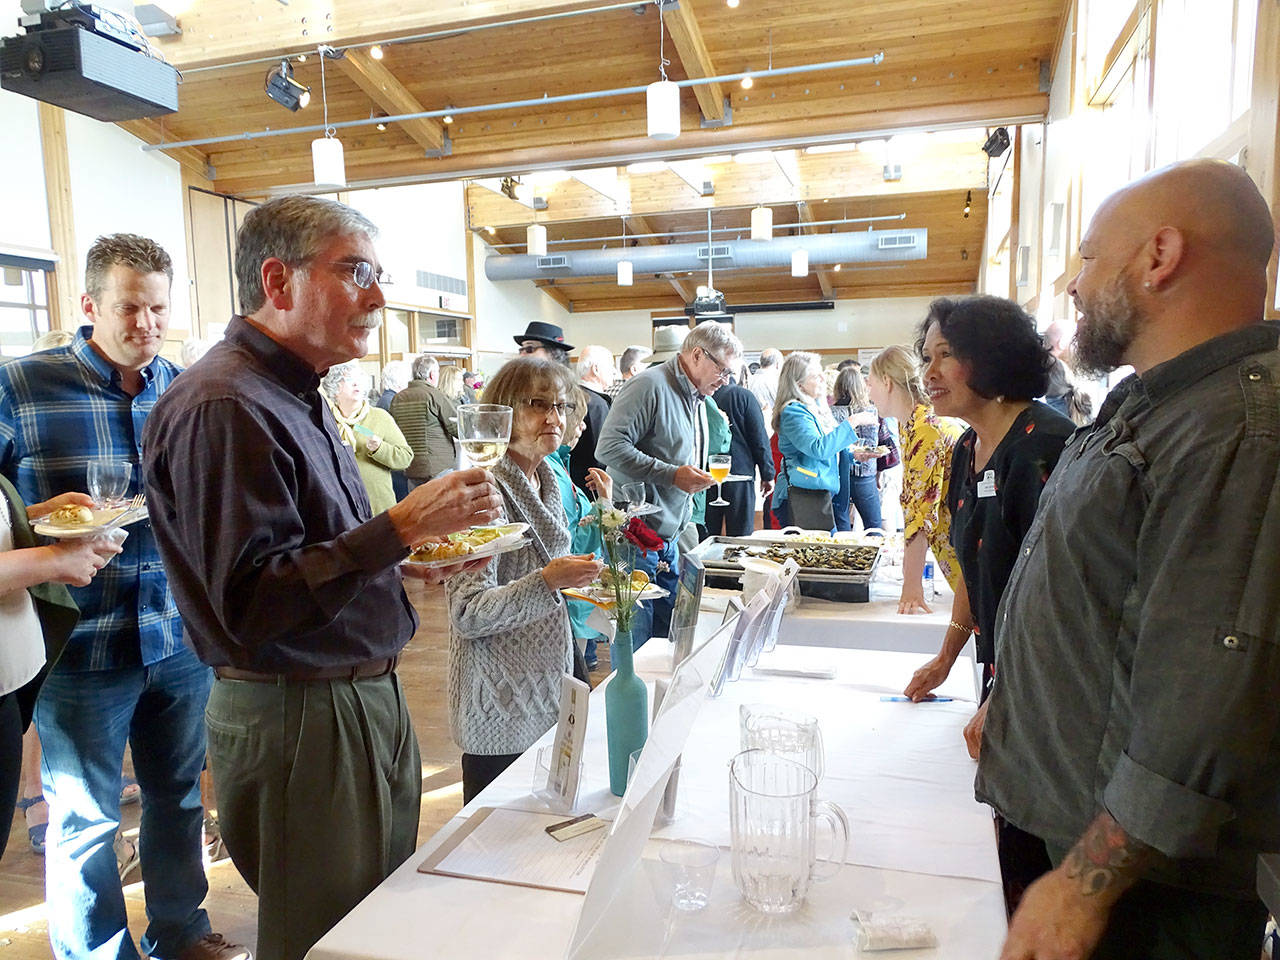 Taste of Port Townsend guests stop by for sips at the Port Townsend Vineyards booth.